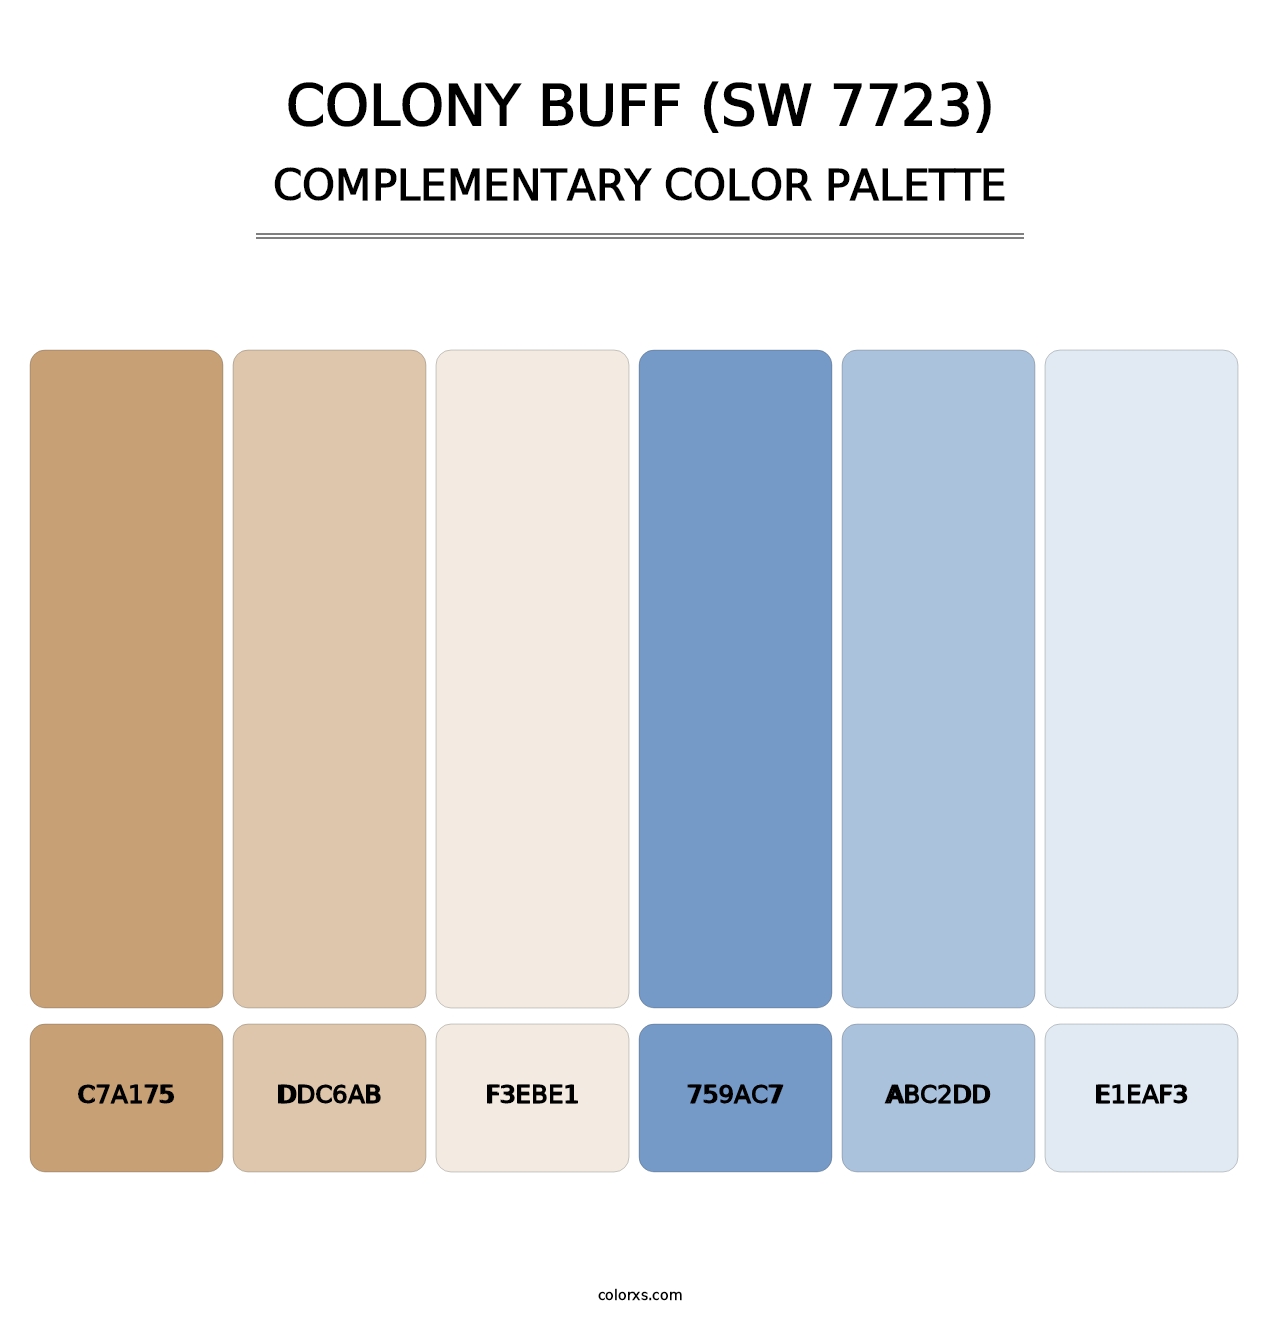 Colony Buff (SW 7723) - Complementary Color Palette